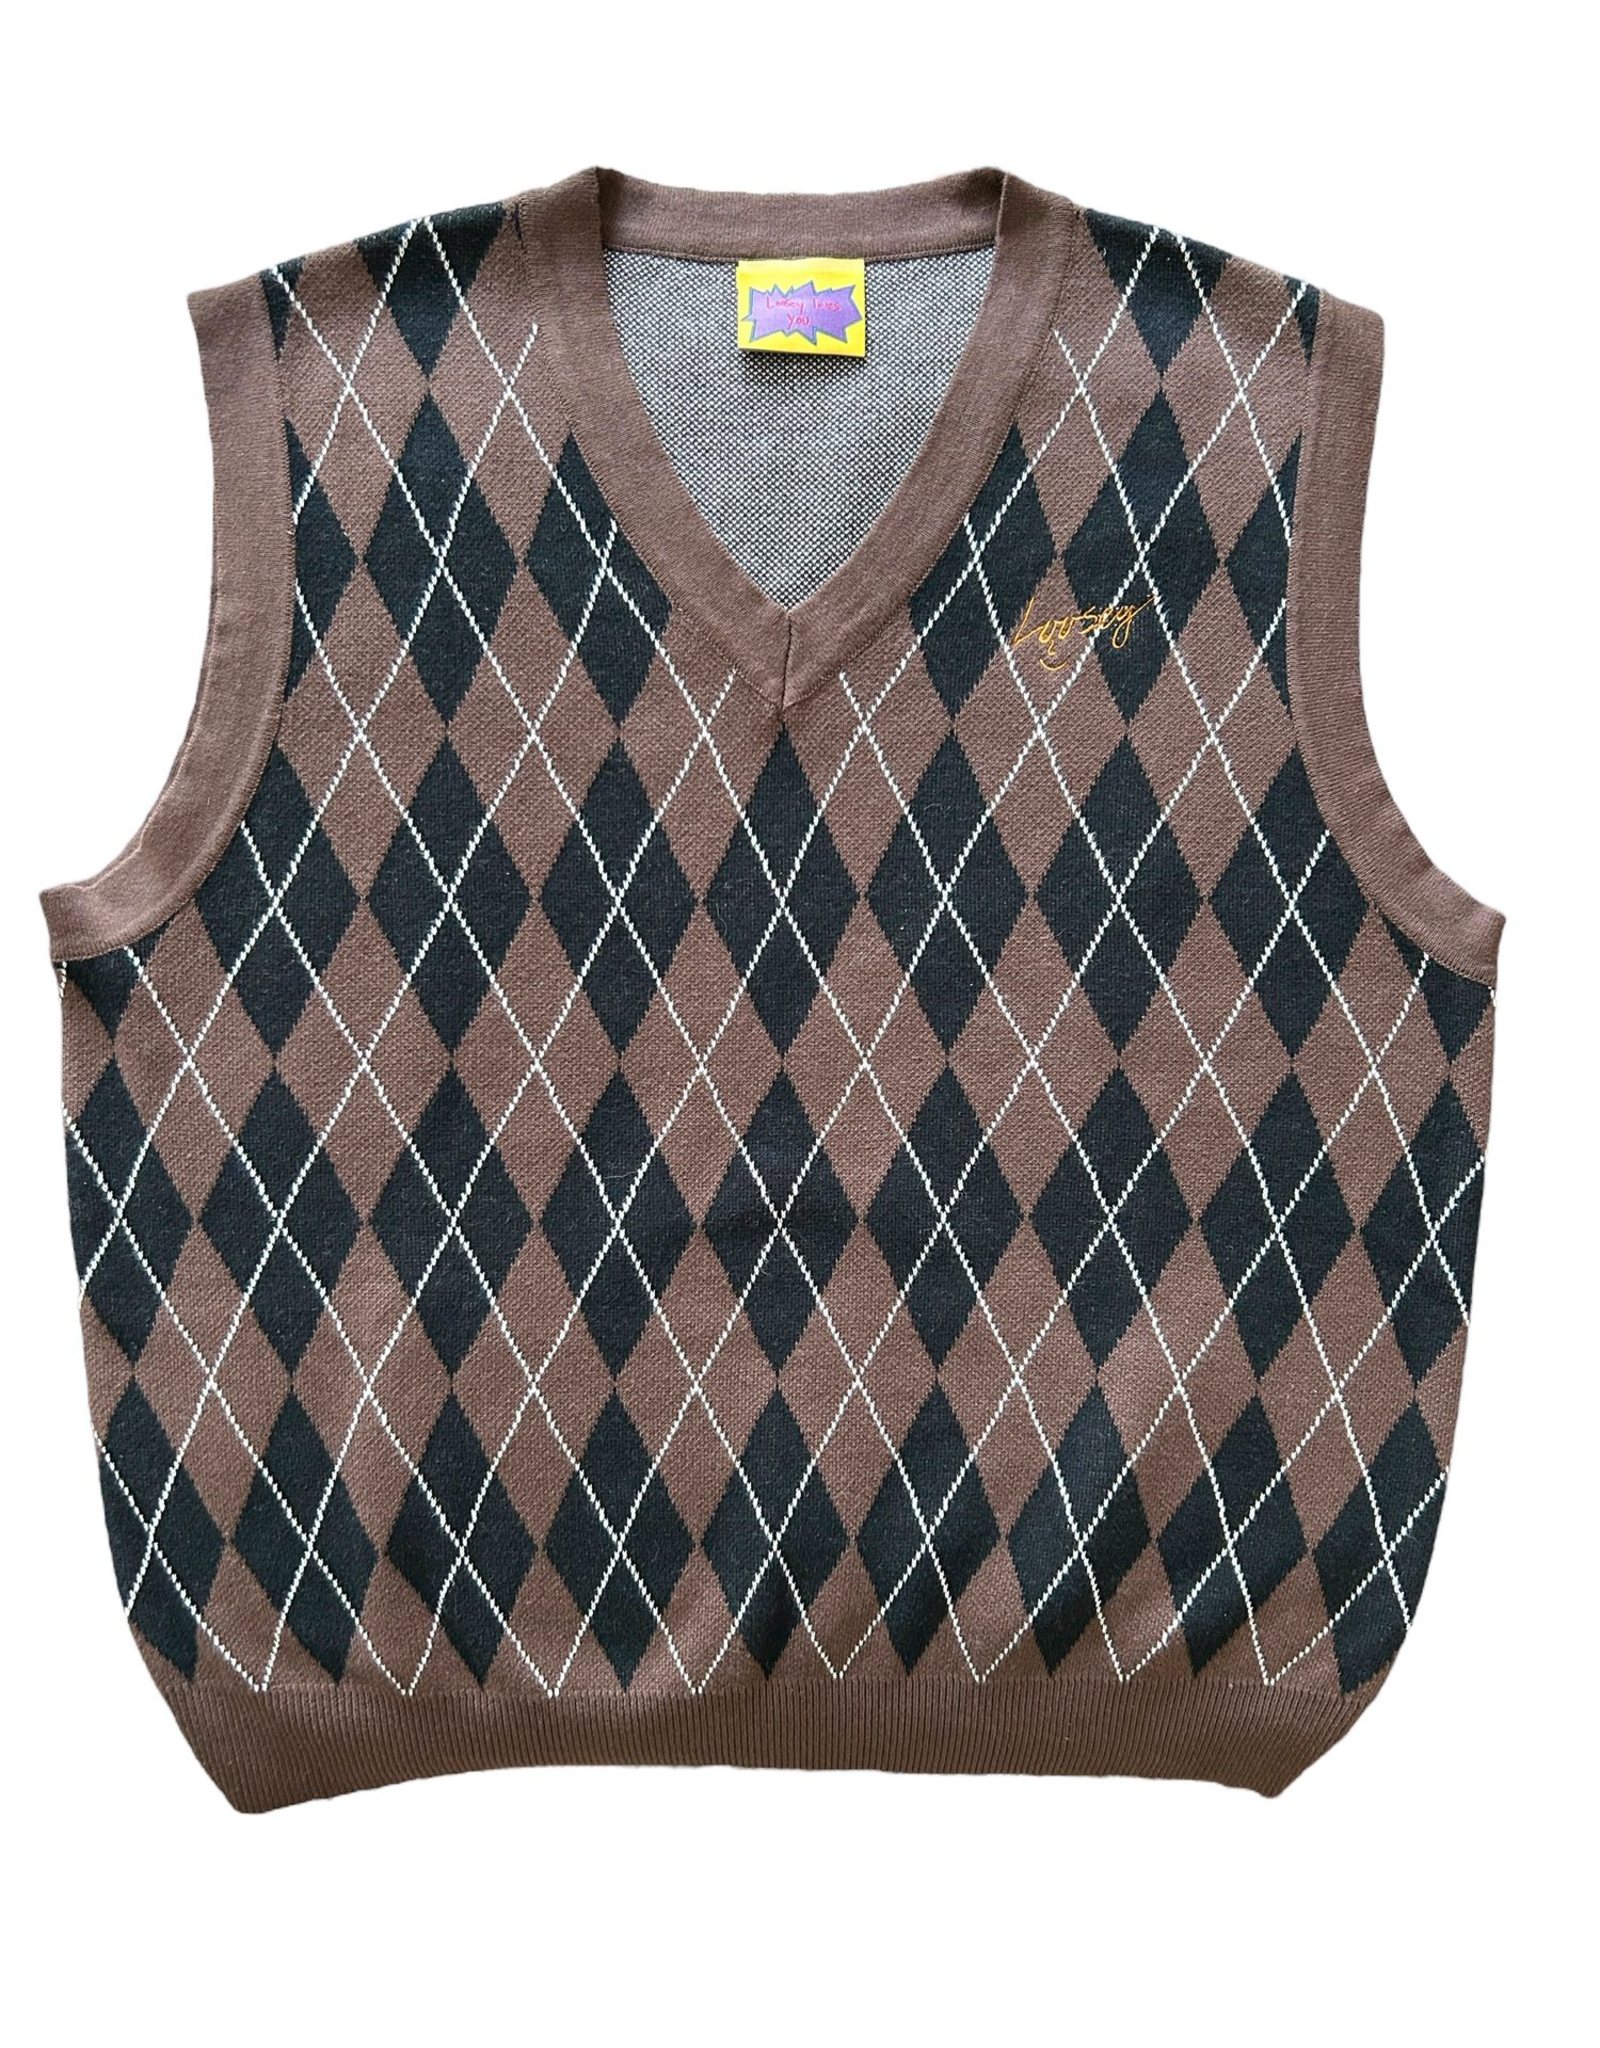 LOOSEY LOOSEY ARGYLE VEST - BROWN